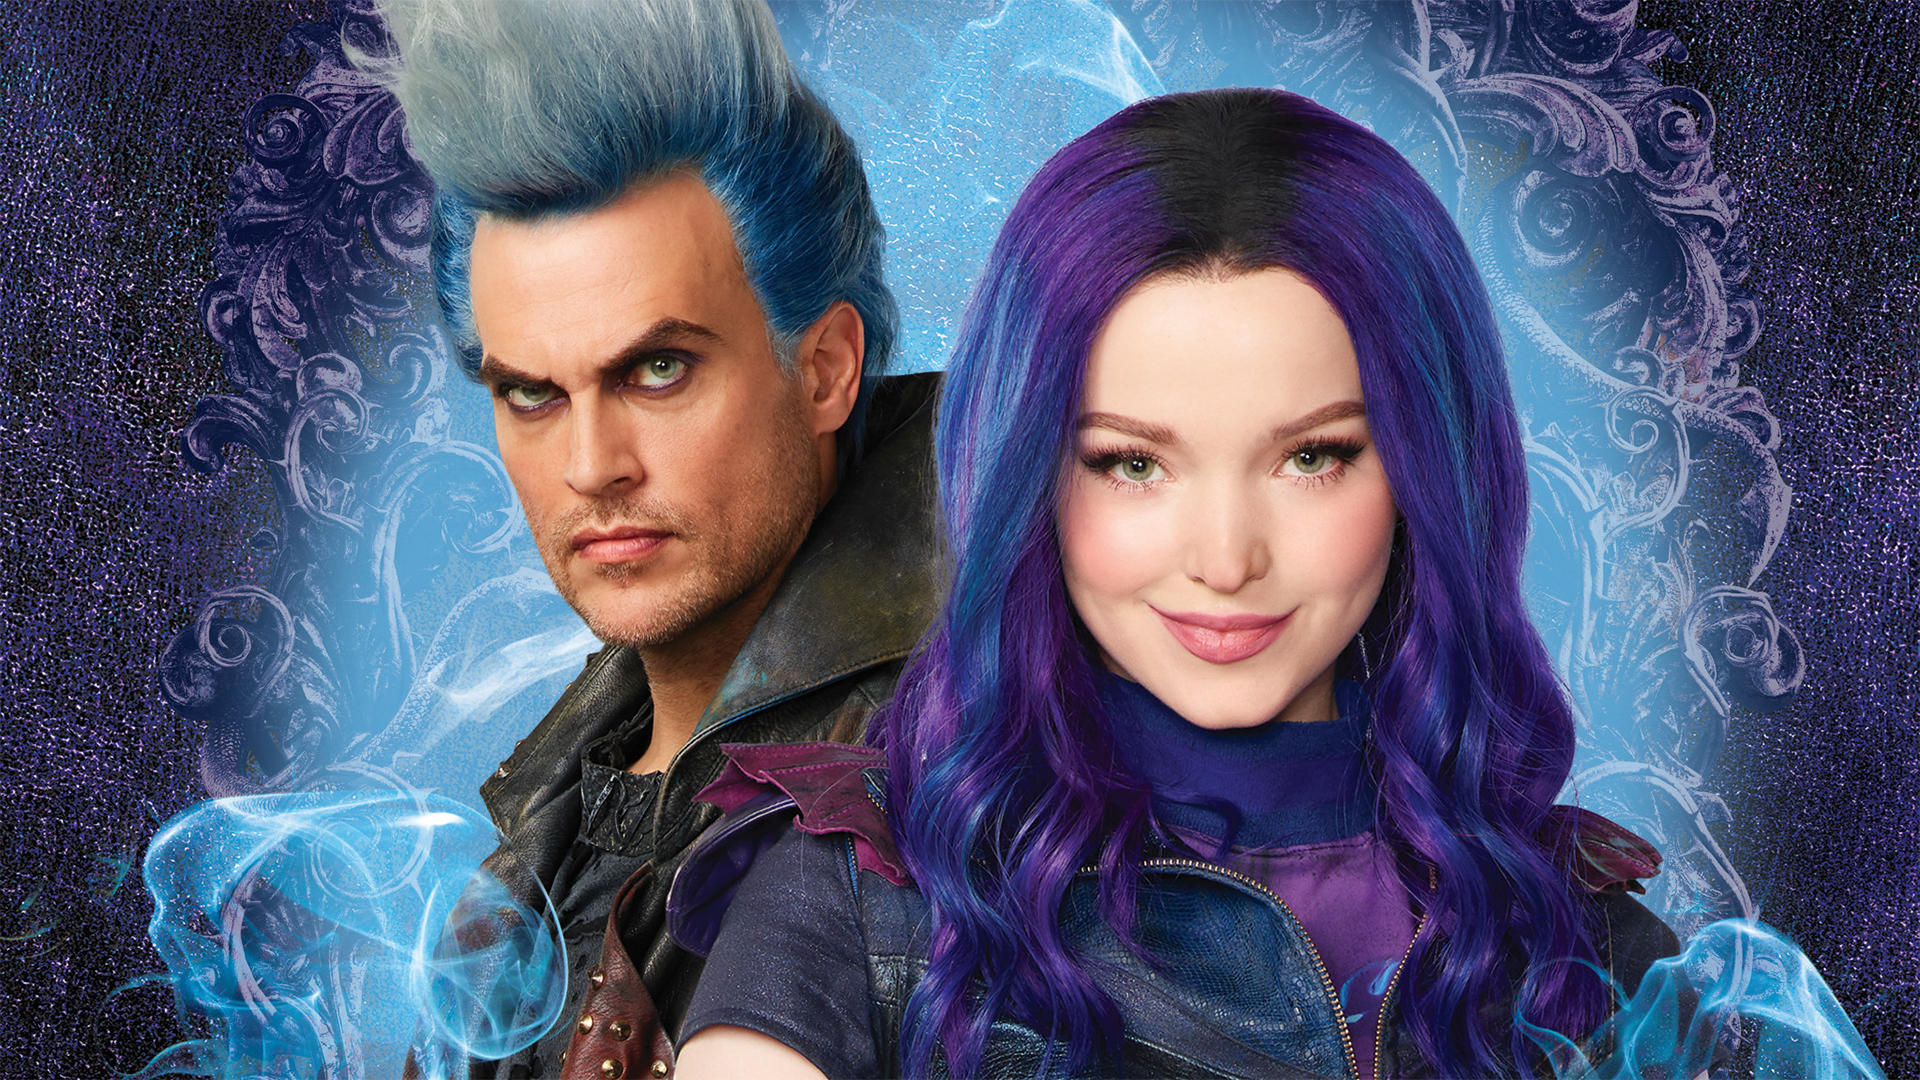 Disney Descendants 3 Like Father Like Daughter - Mal and Hades wallpaper.